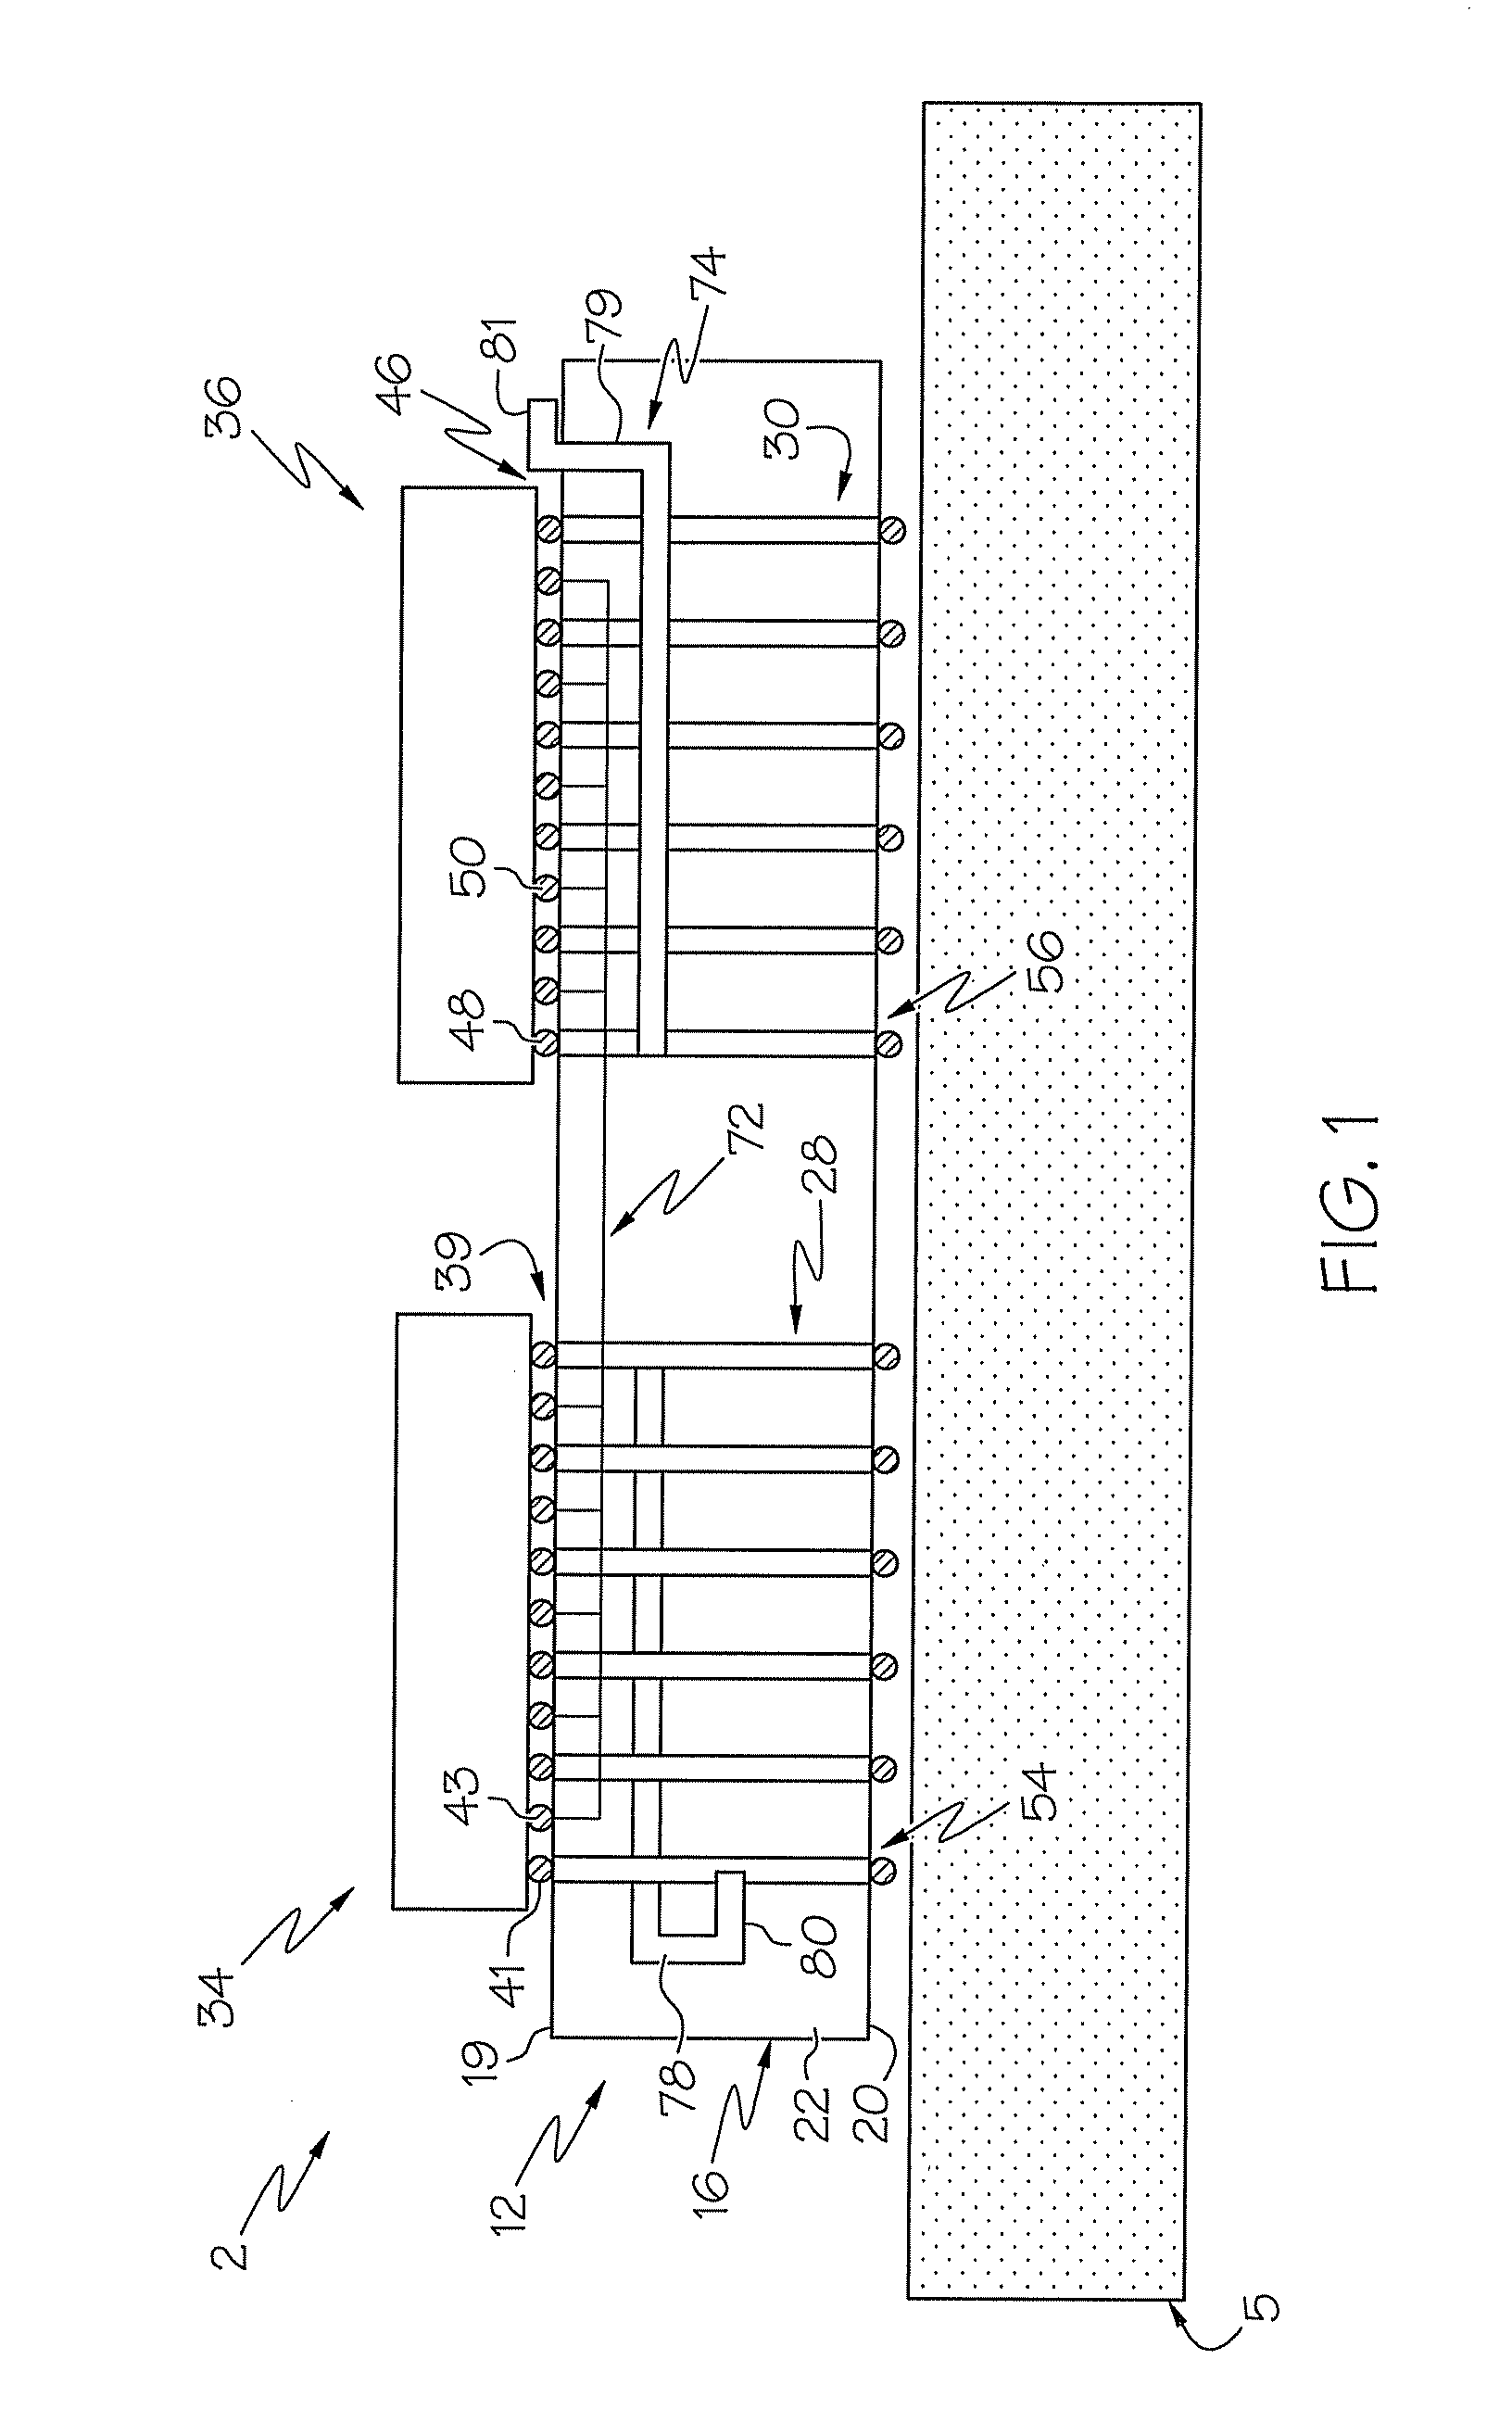 Silicon carrier including an integrated heater for die rework and wafer probe